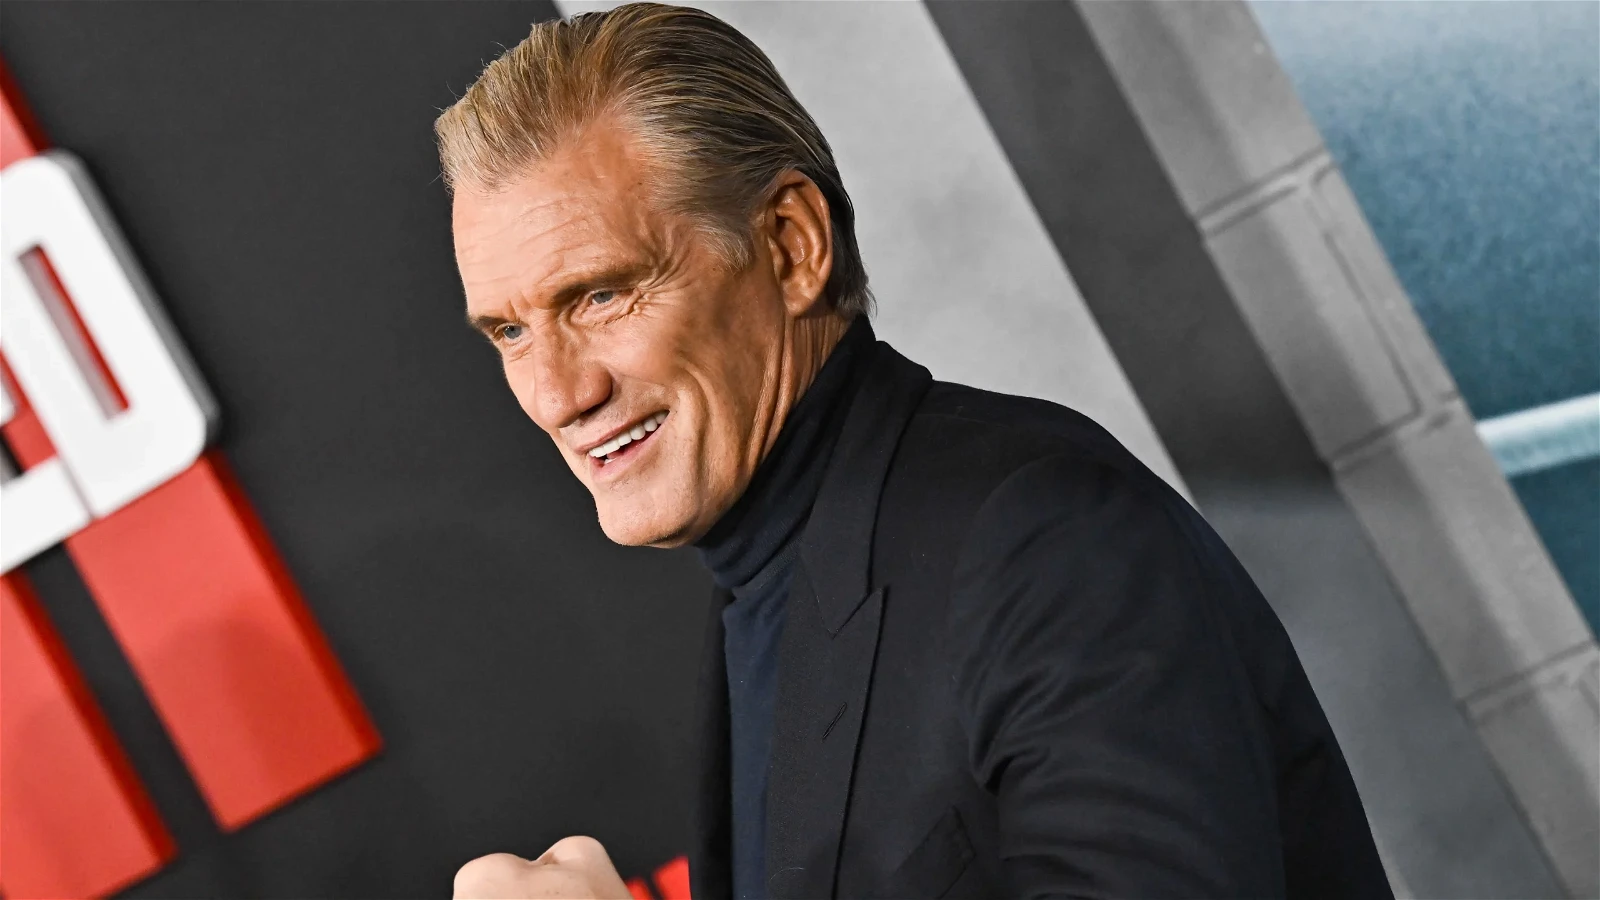 Dolph Lundgren has been suffering from cancer for the past 8 years